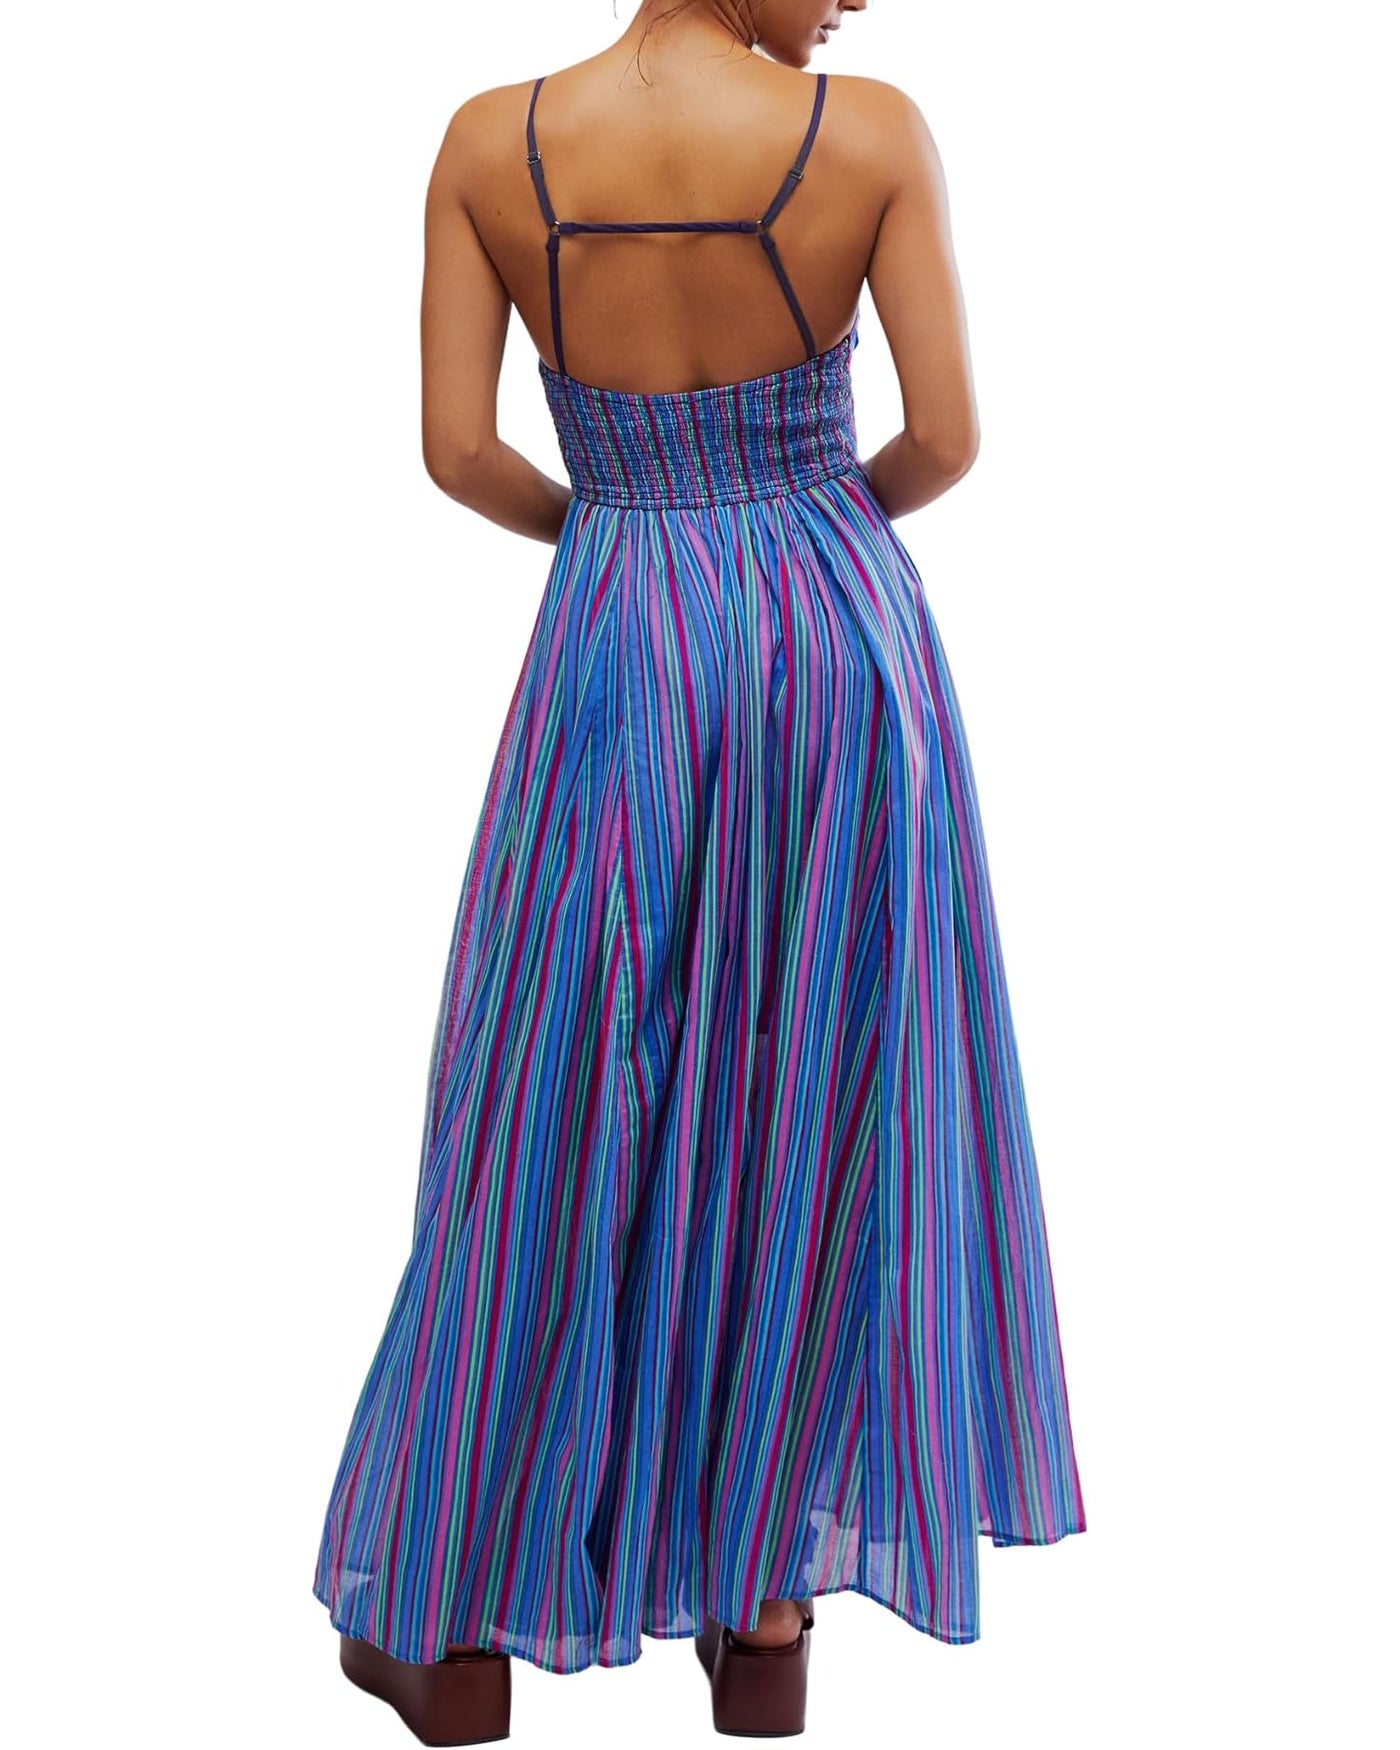 Dream Weaver Maxi by Free People